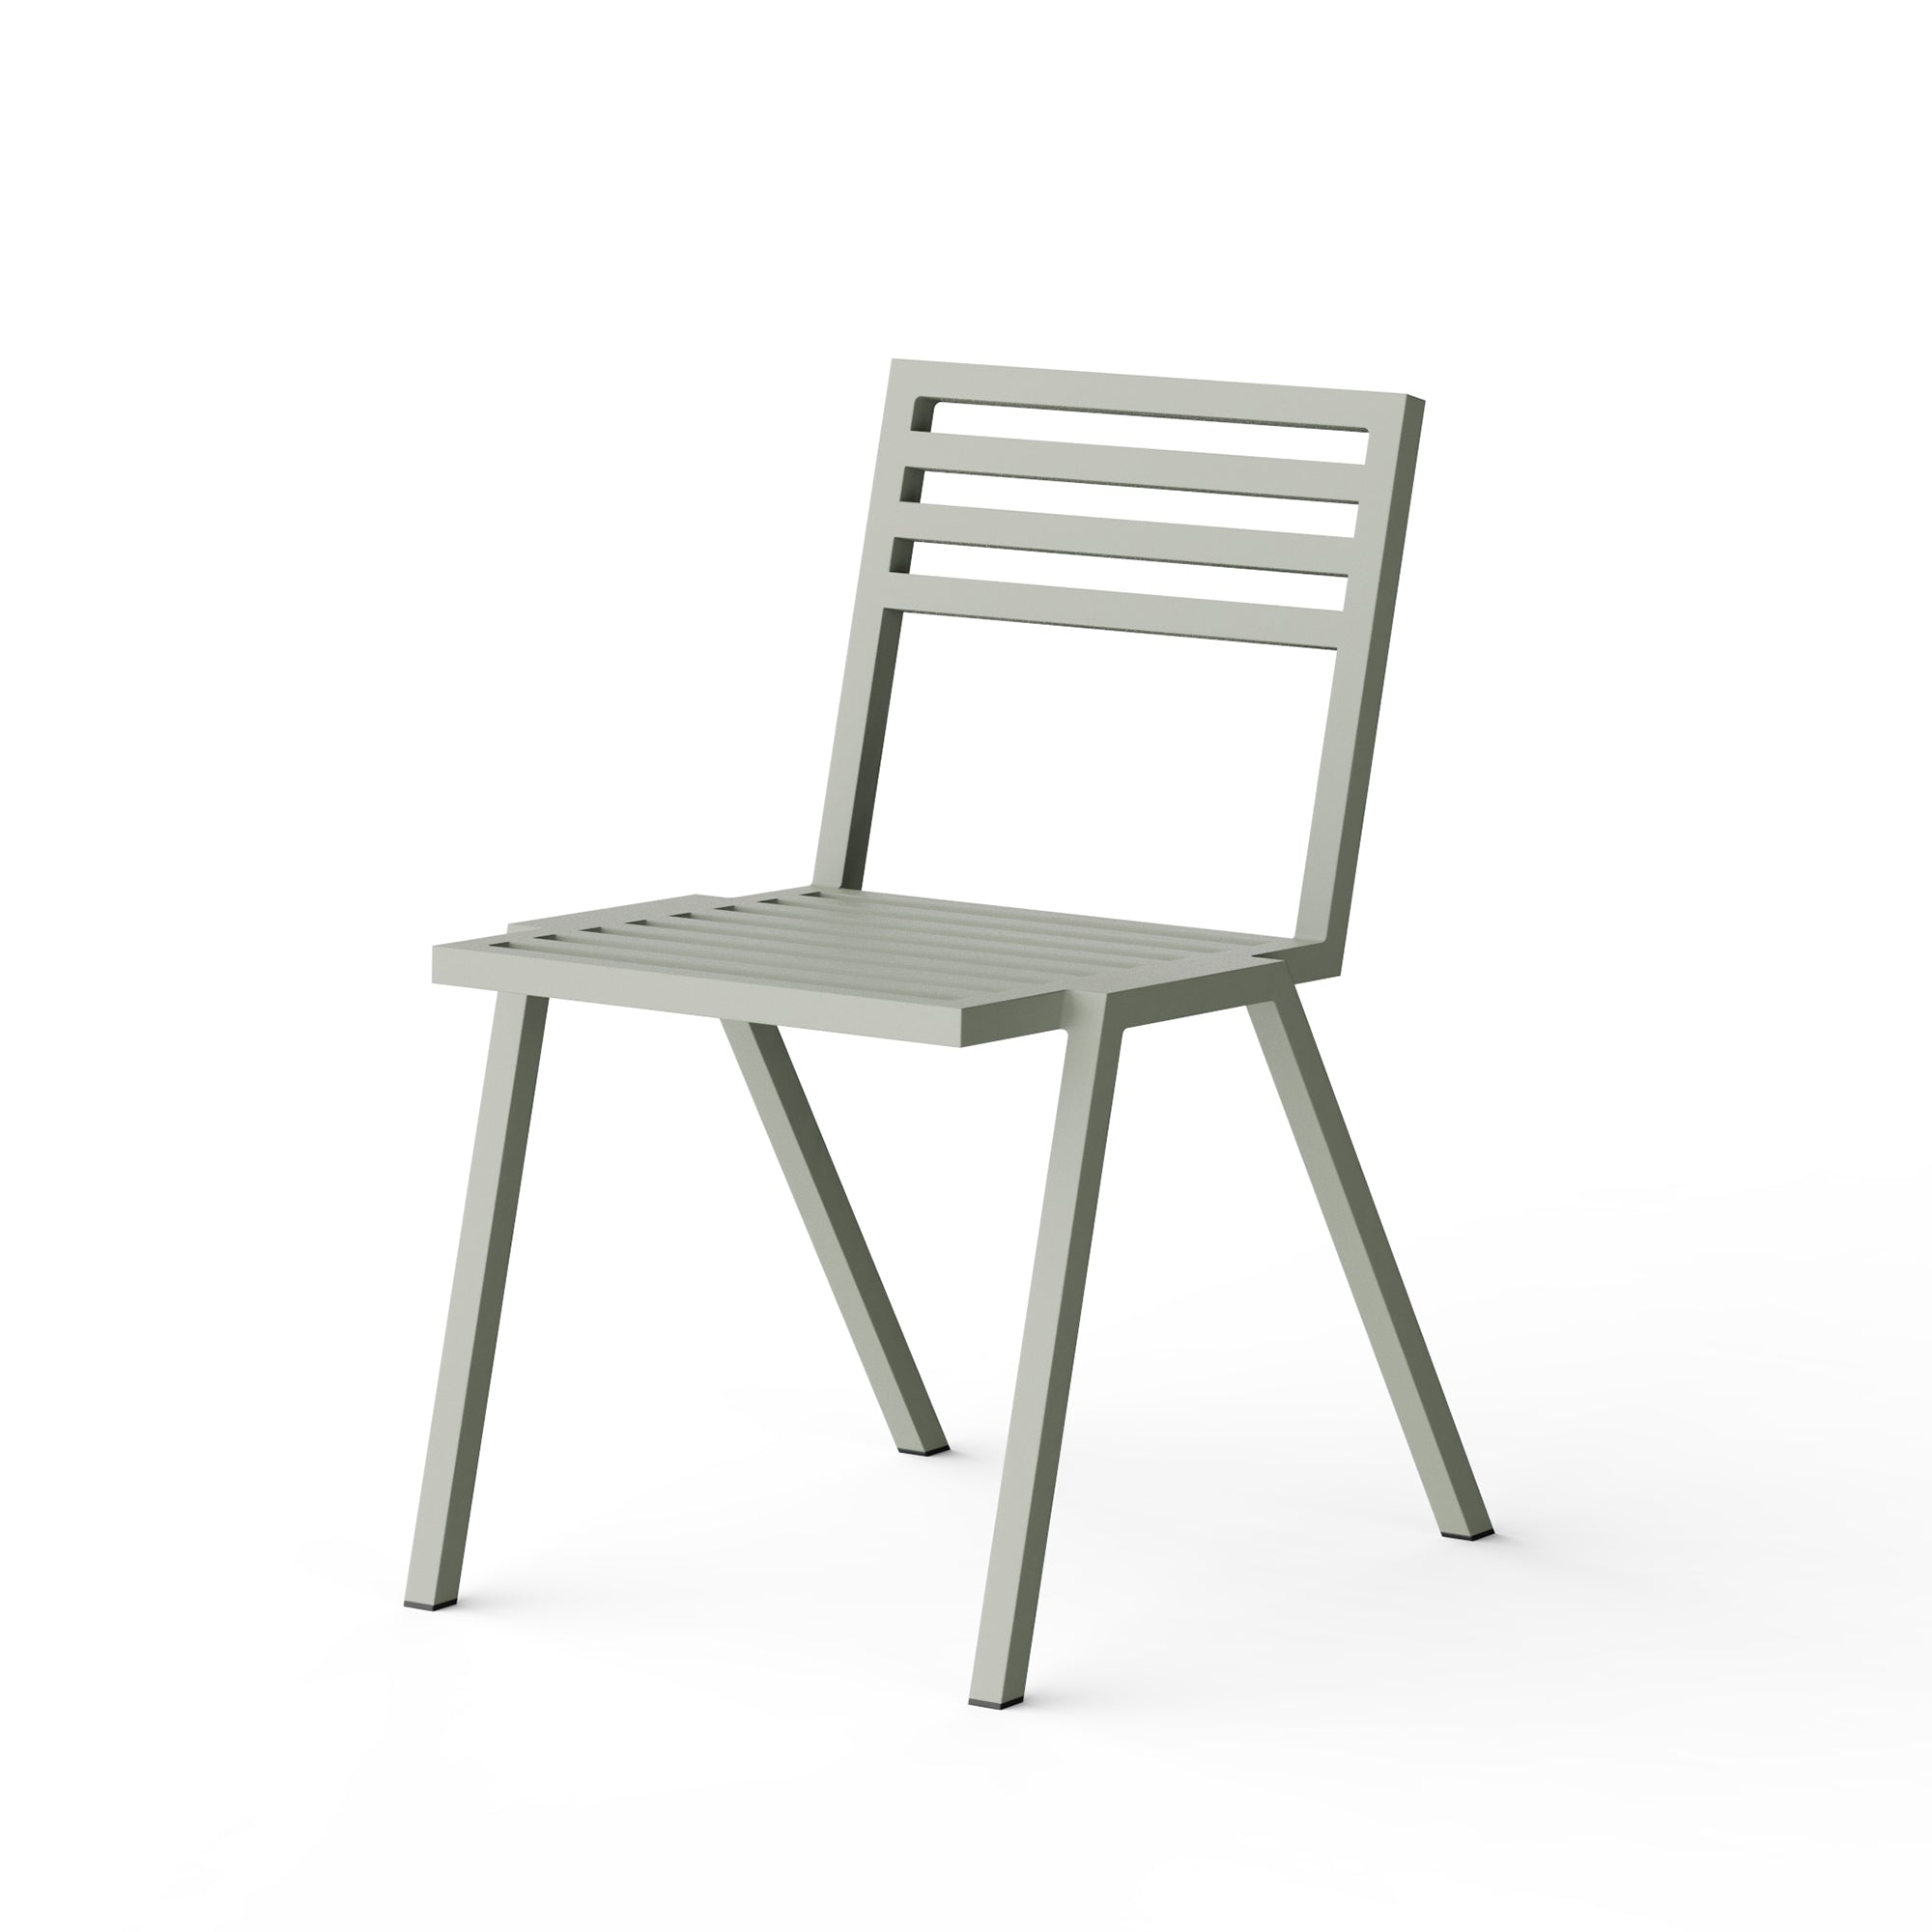 NINE 19 Outdoors Stacking Chair